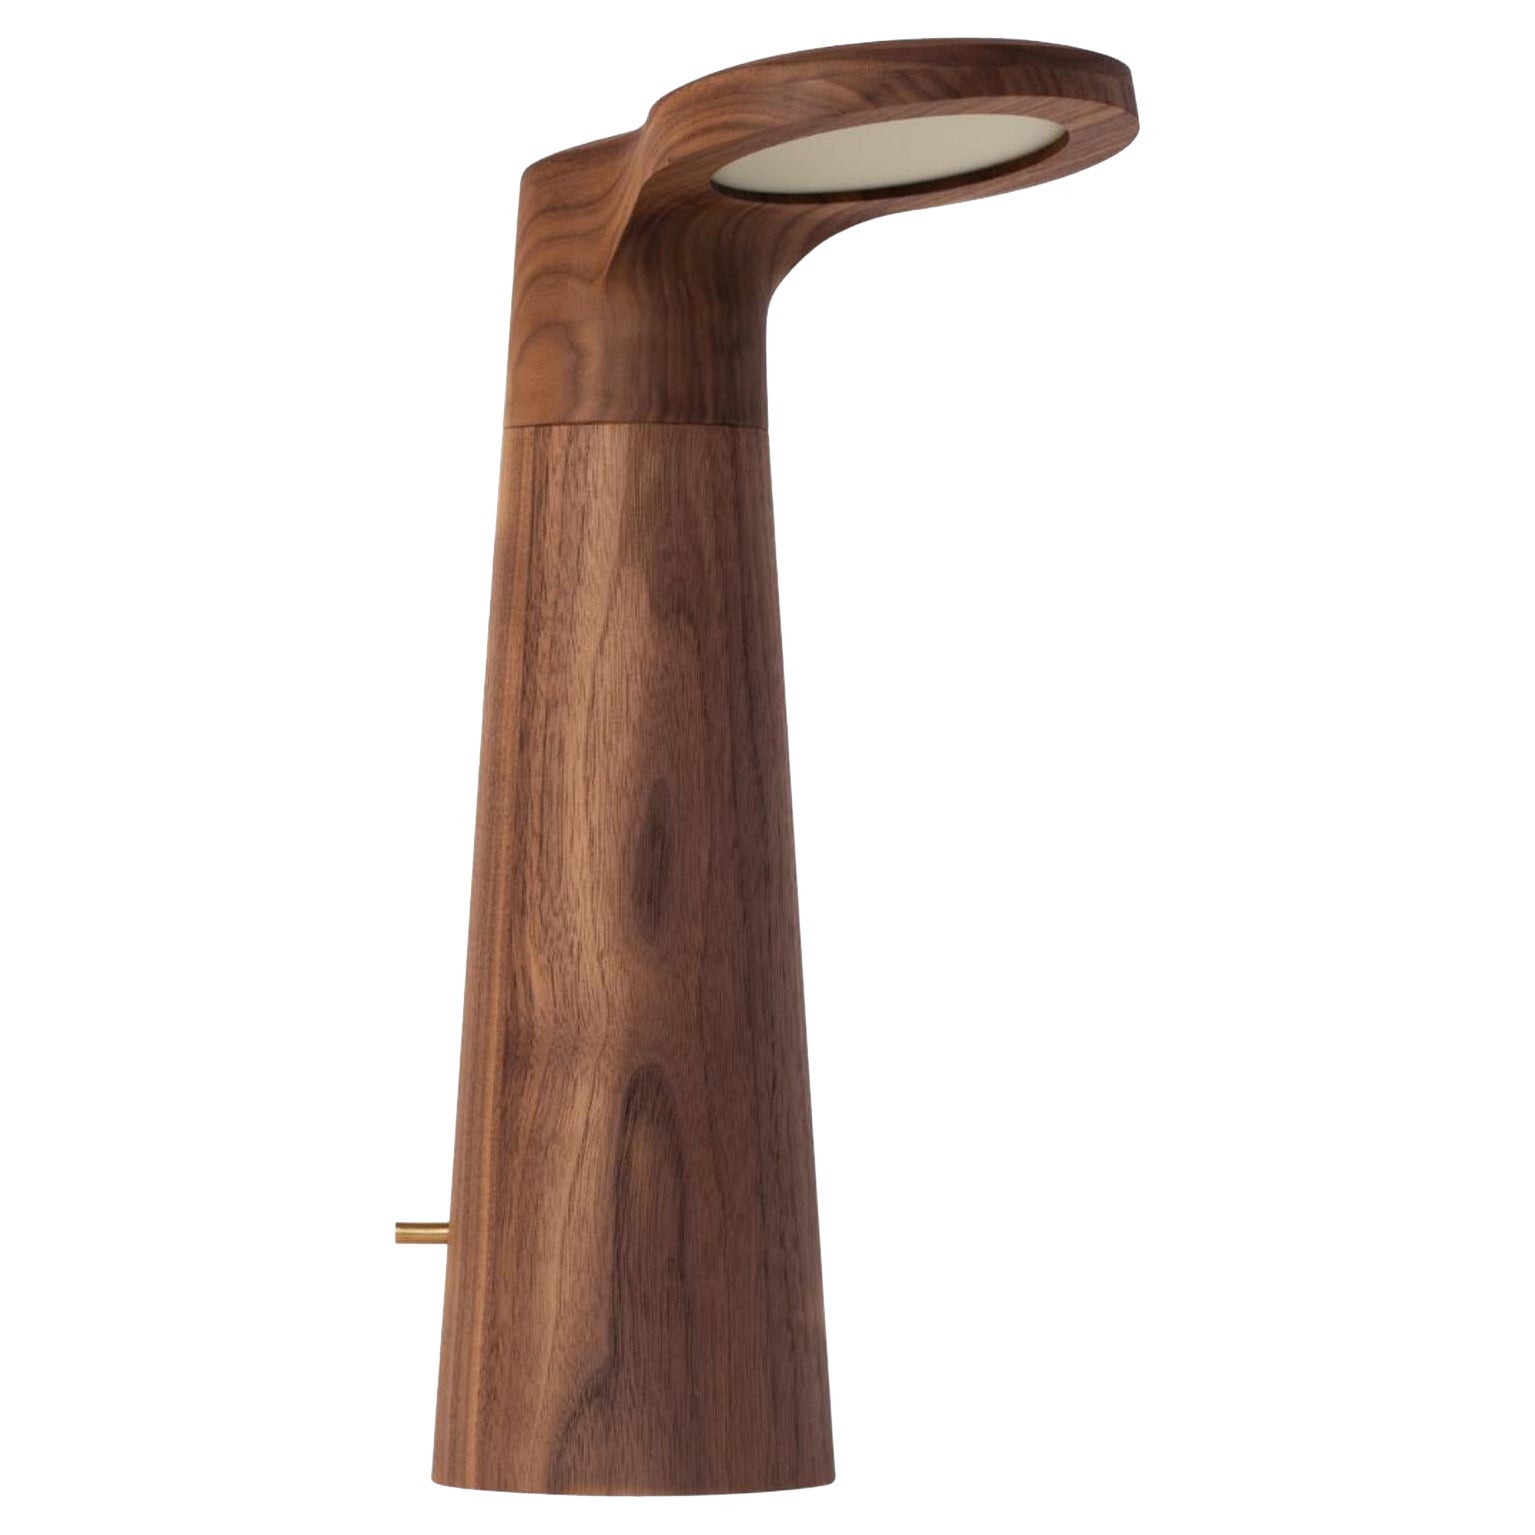 Canaletto Walnut, Studio Light by Isato Prugger For Sale